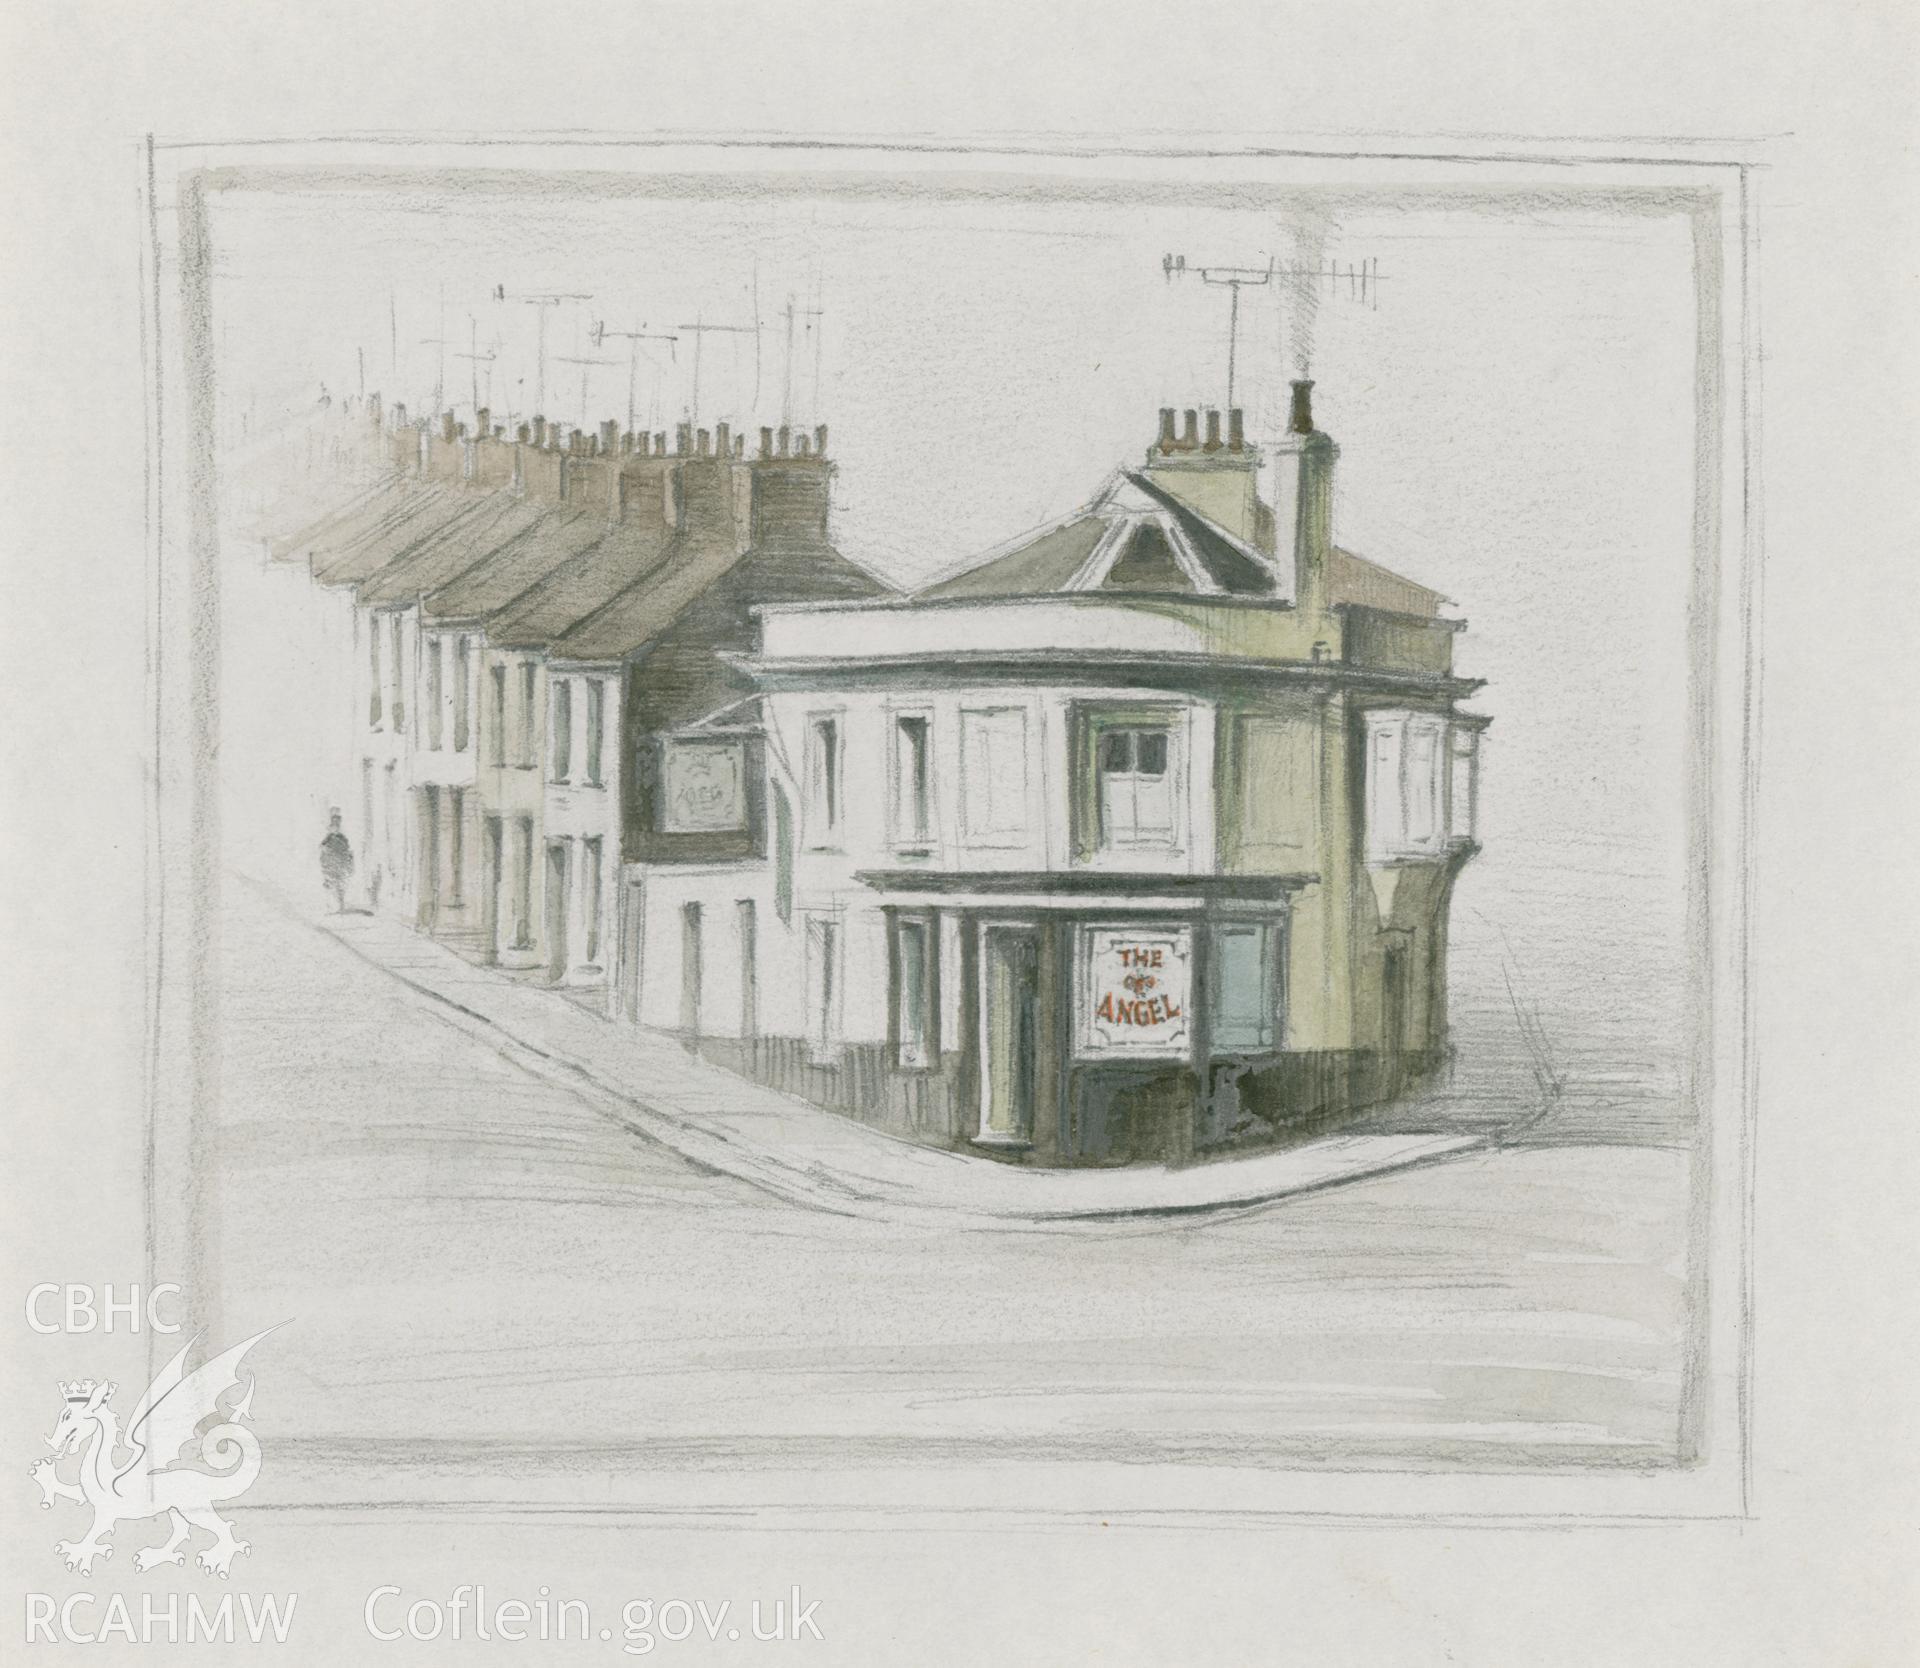 Digital copy of The Angel, Newport: (pencil and watercolour) drawing.